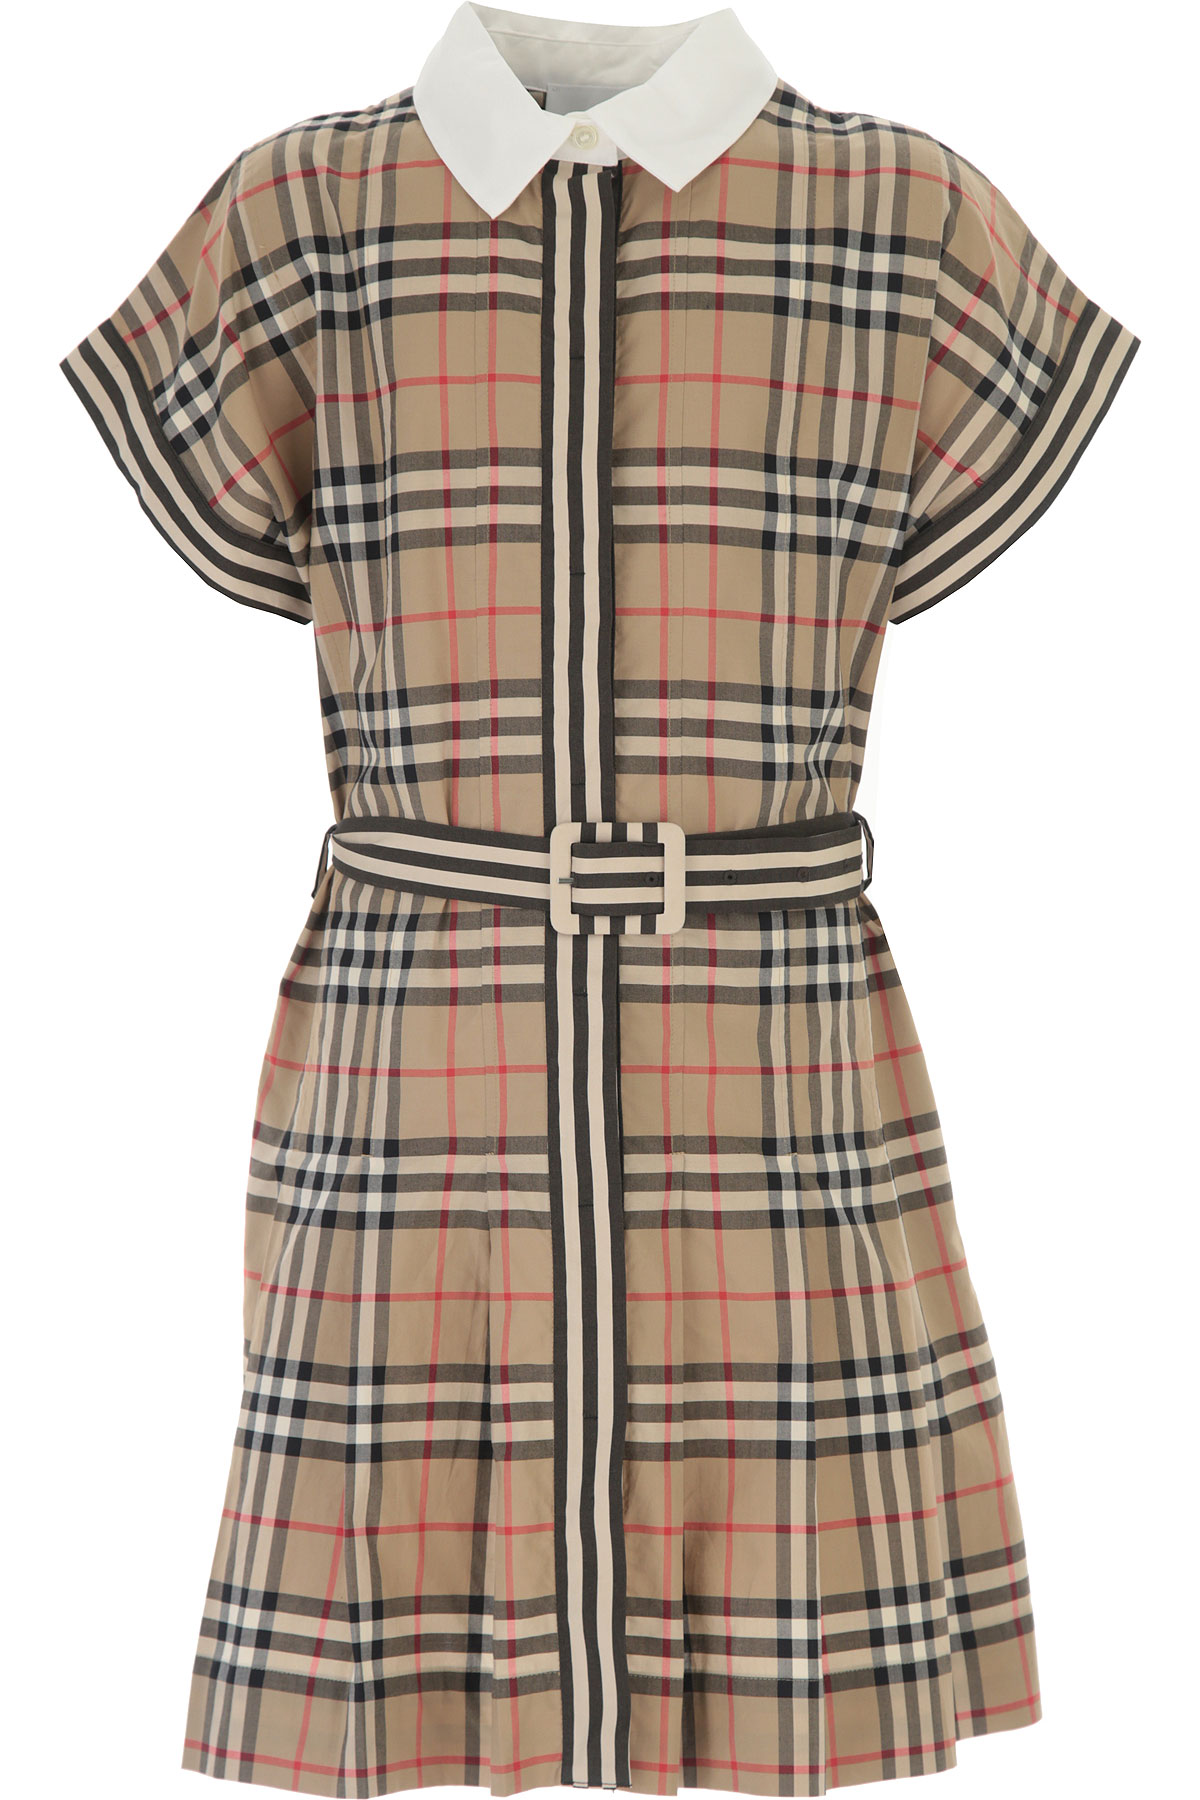 Girls Clothing Burberry, Style code: 8036479-a7028-